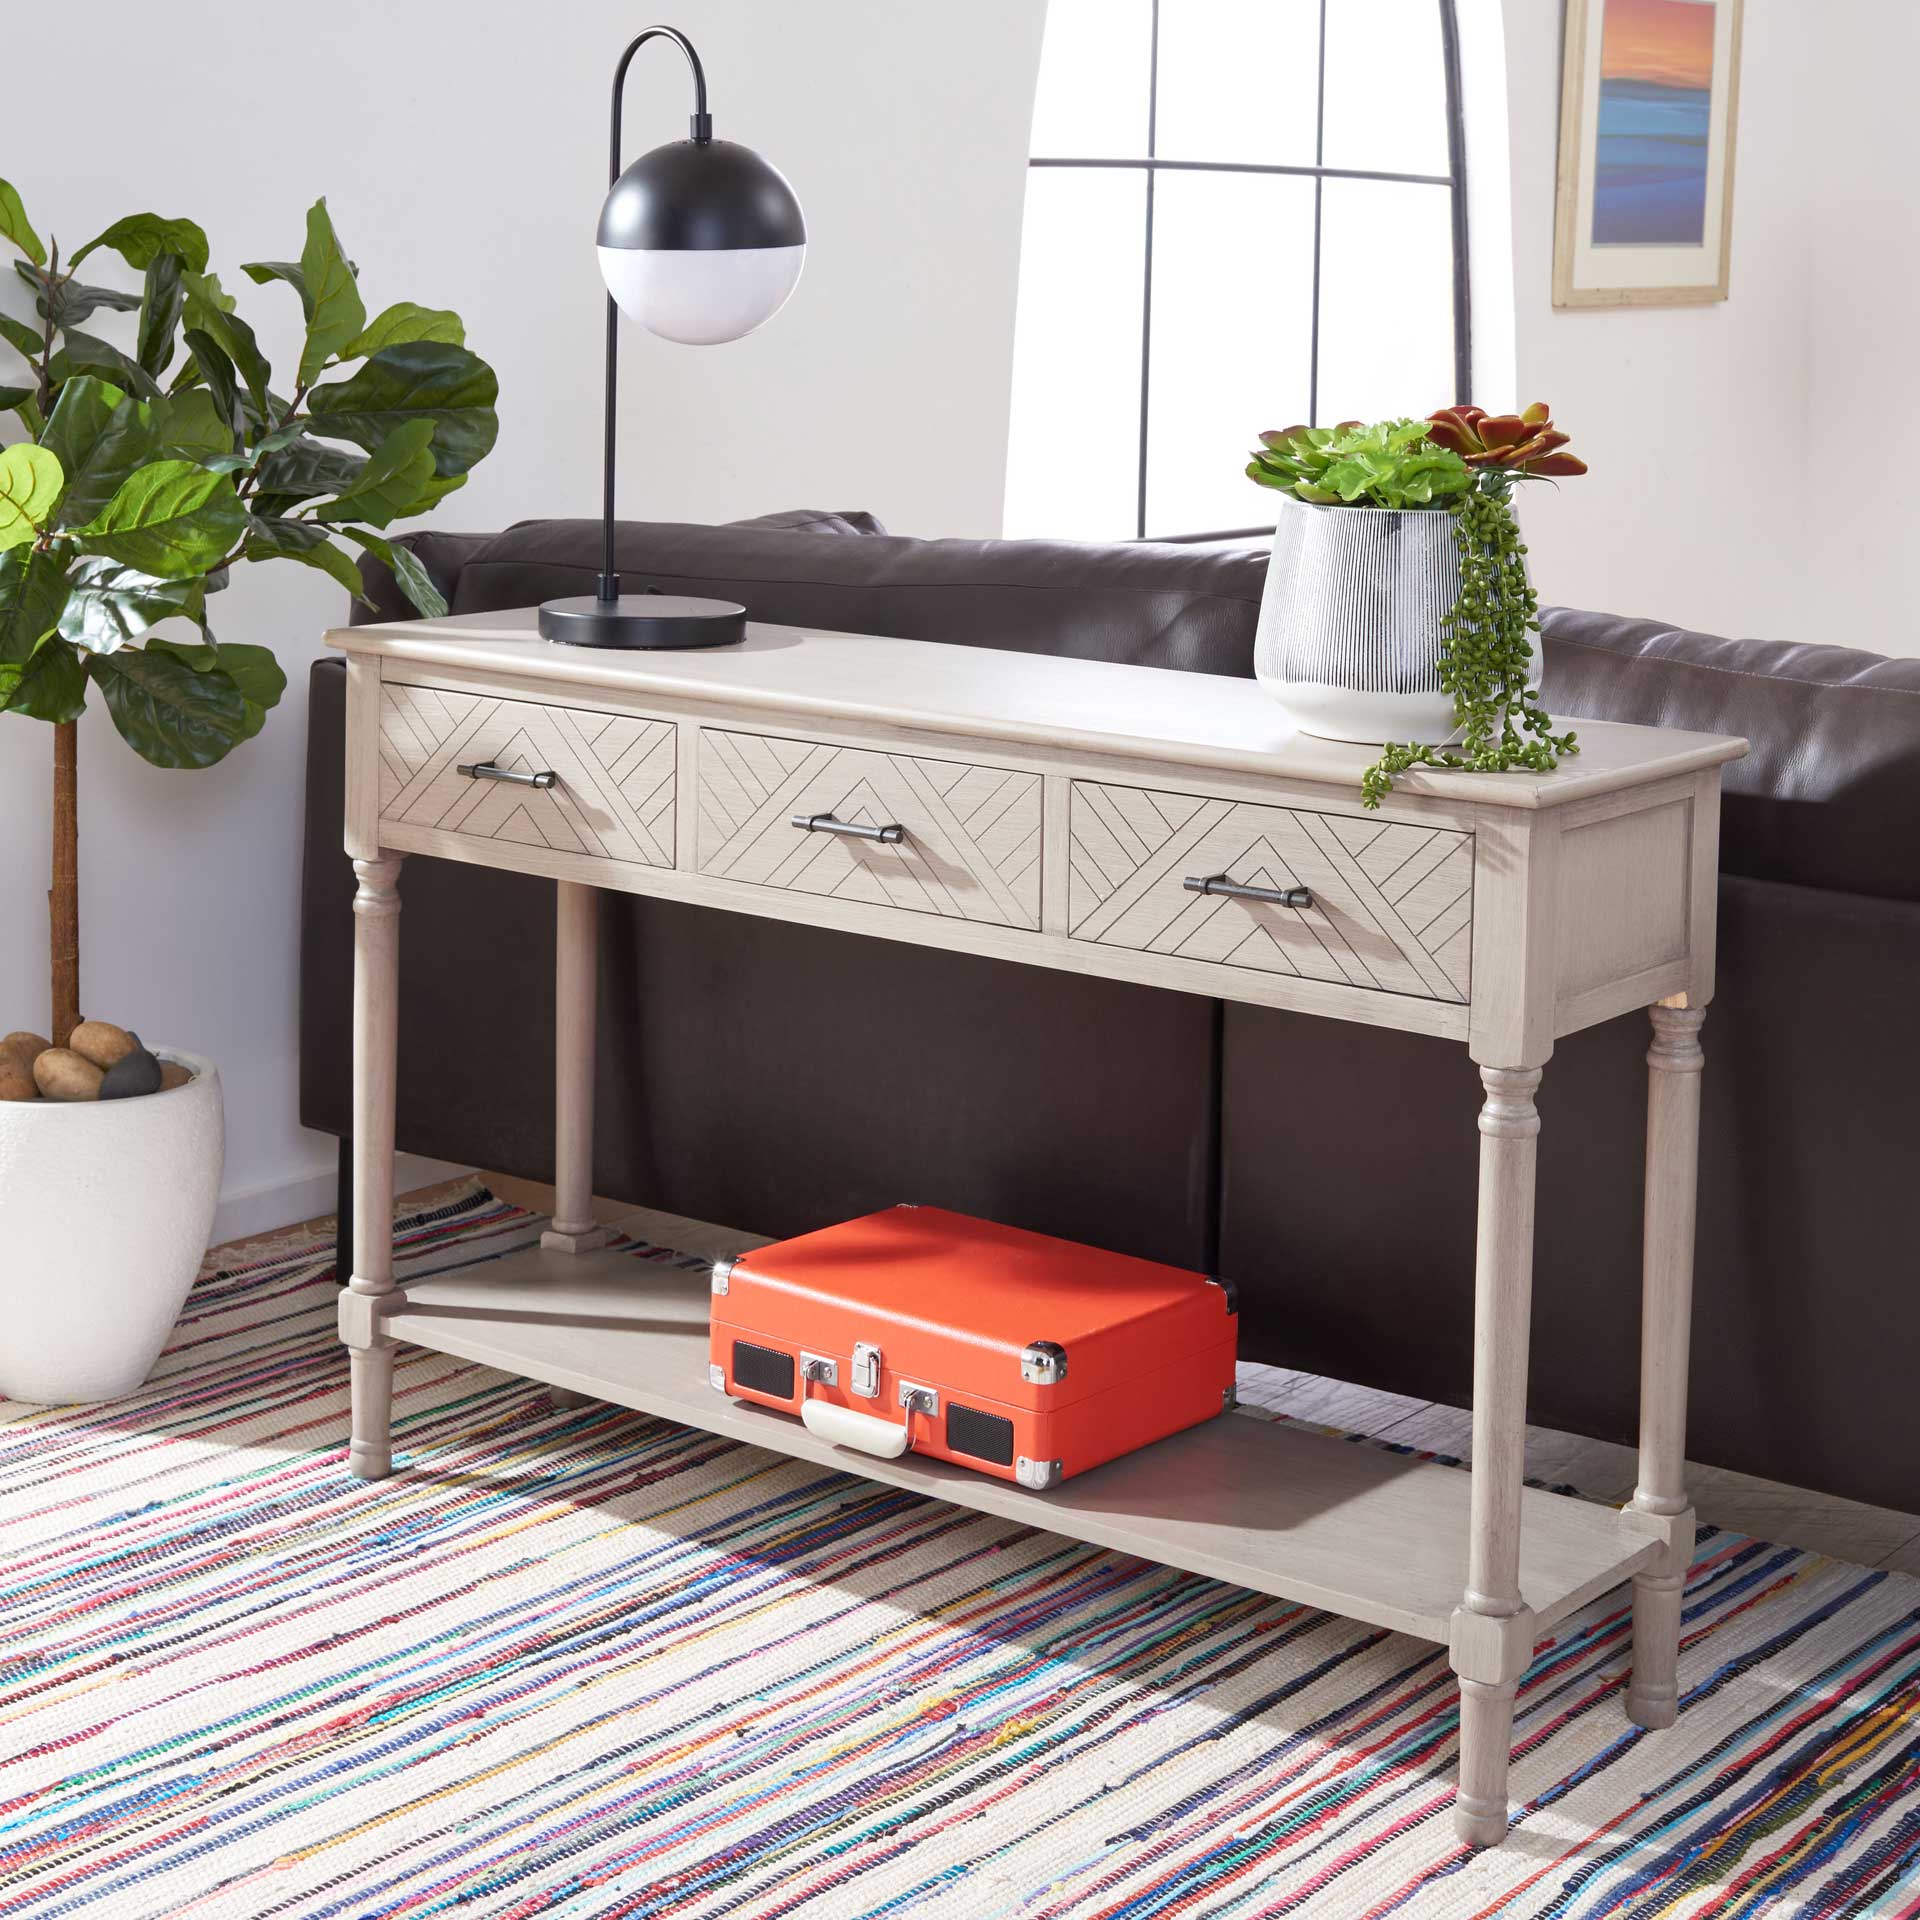 Pebbles 3 Drawer Console Table Greige